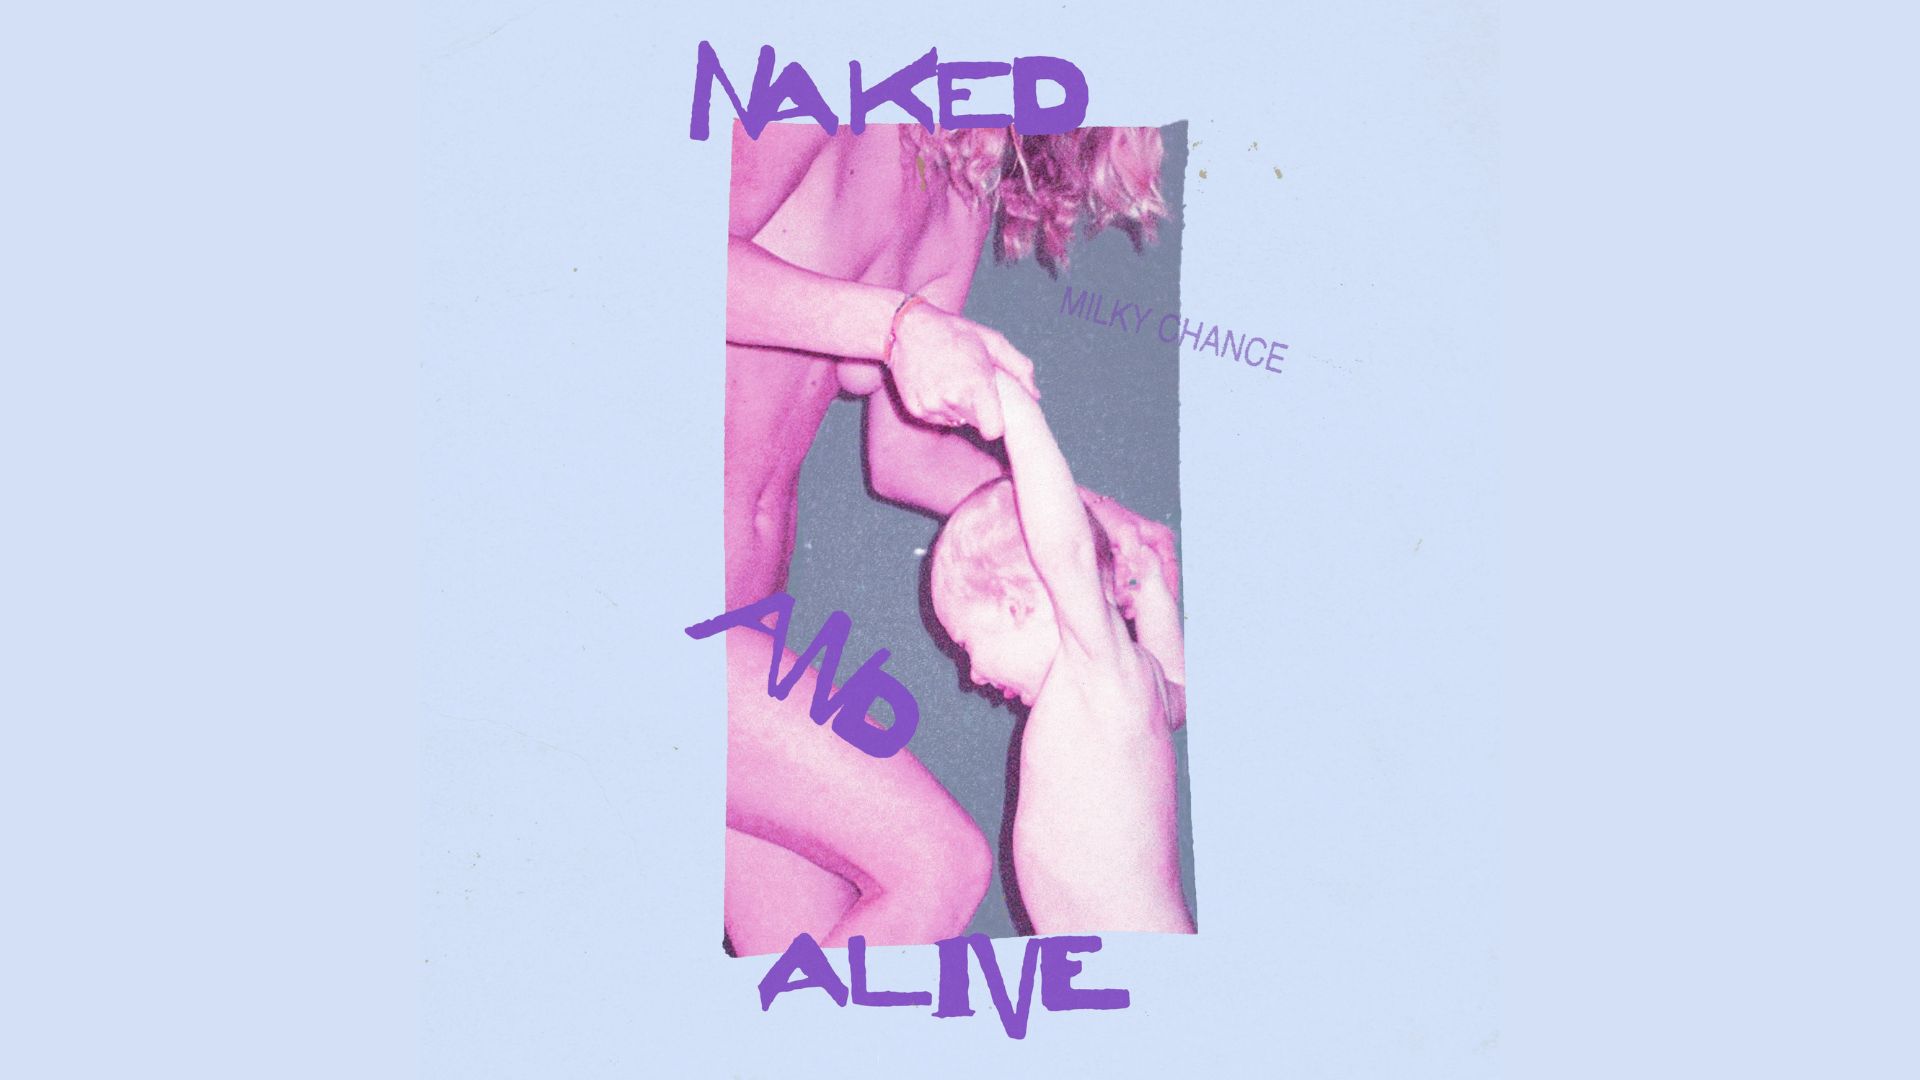 naked and alive milky chance